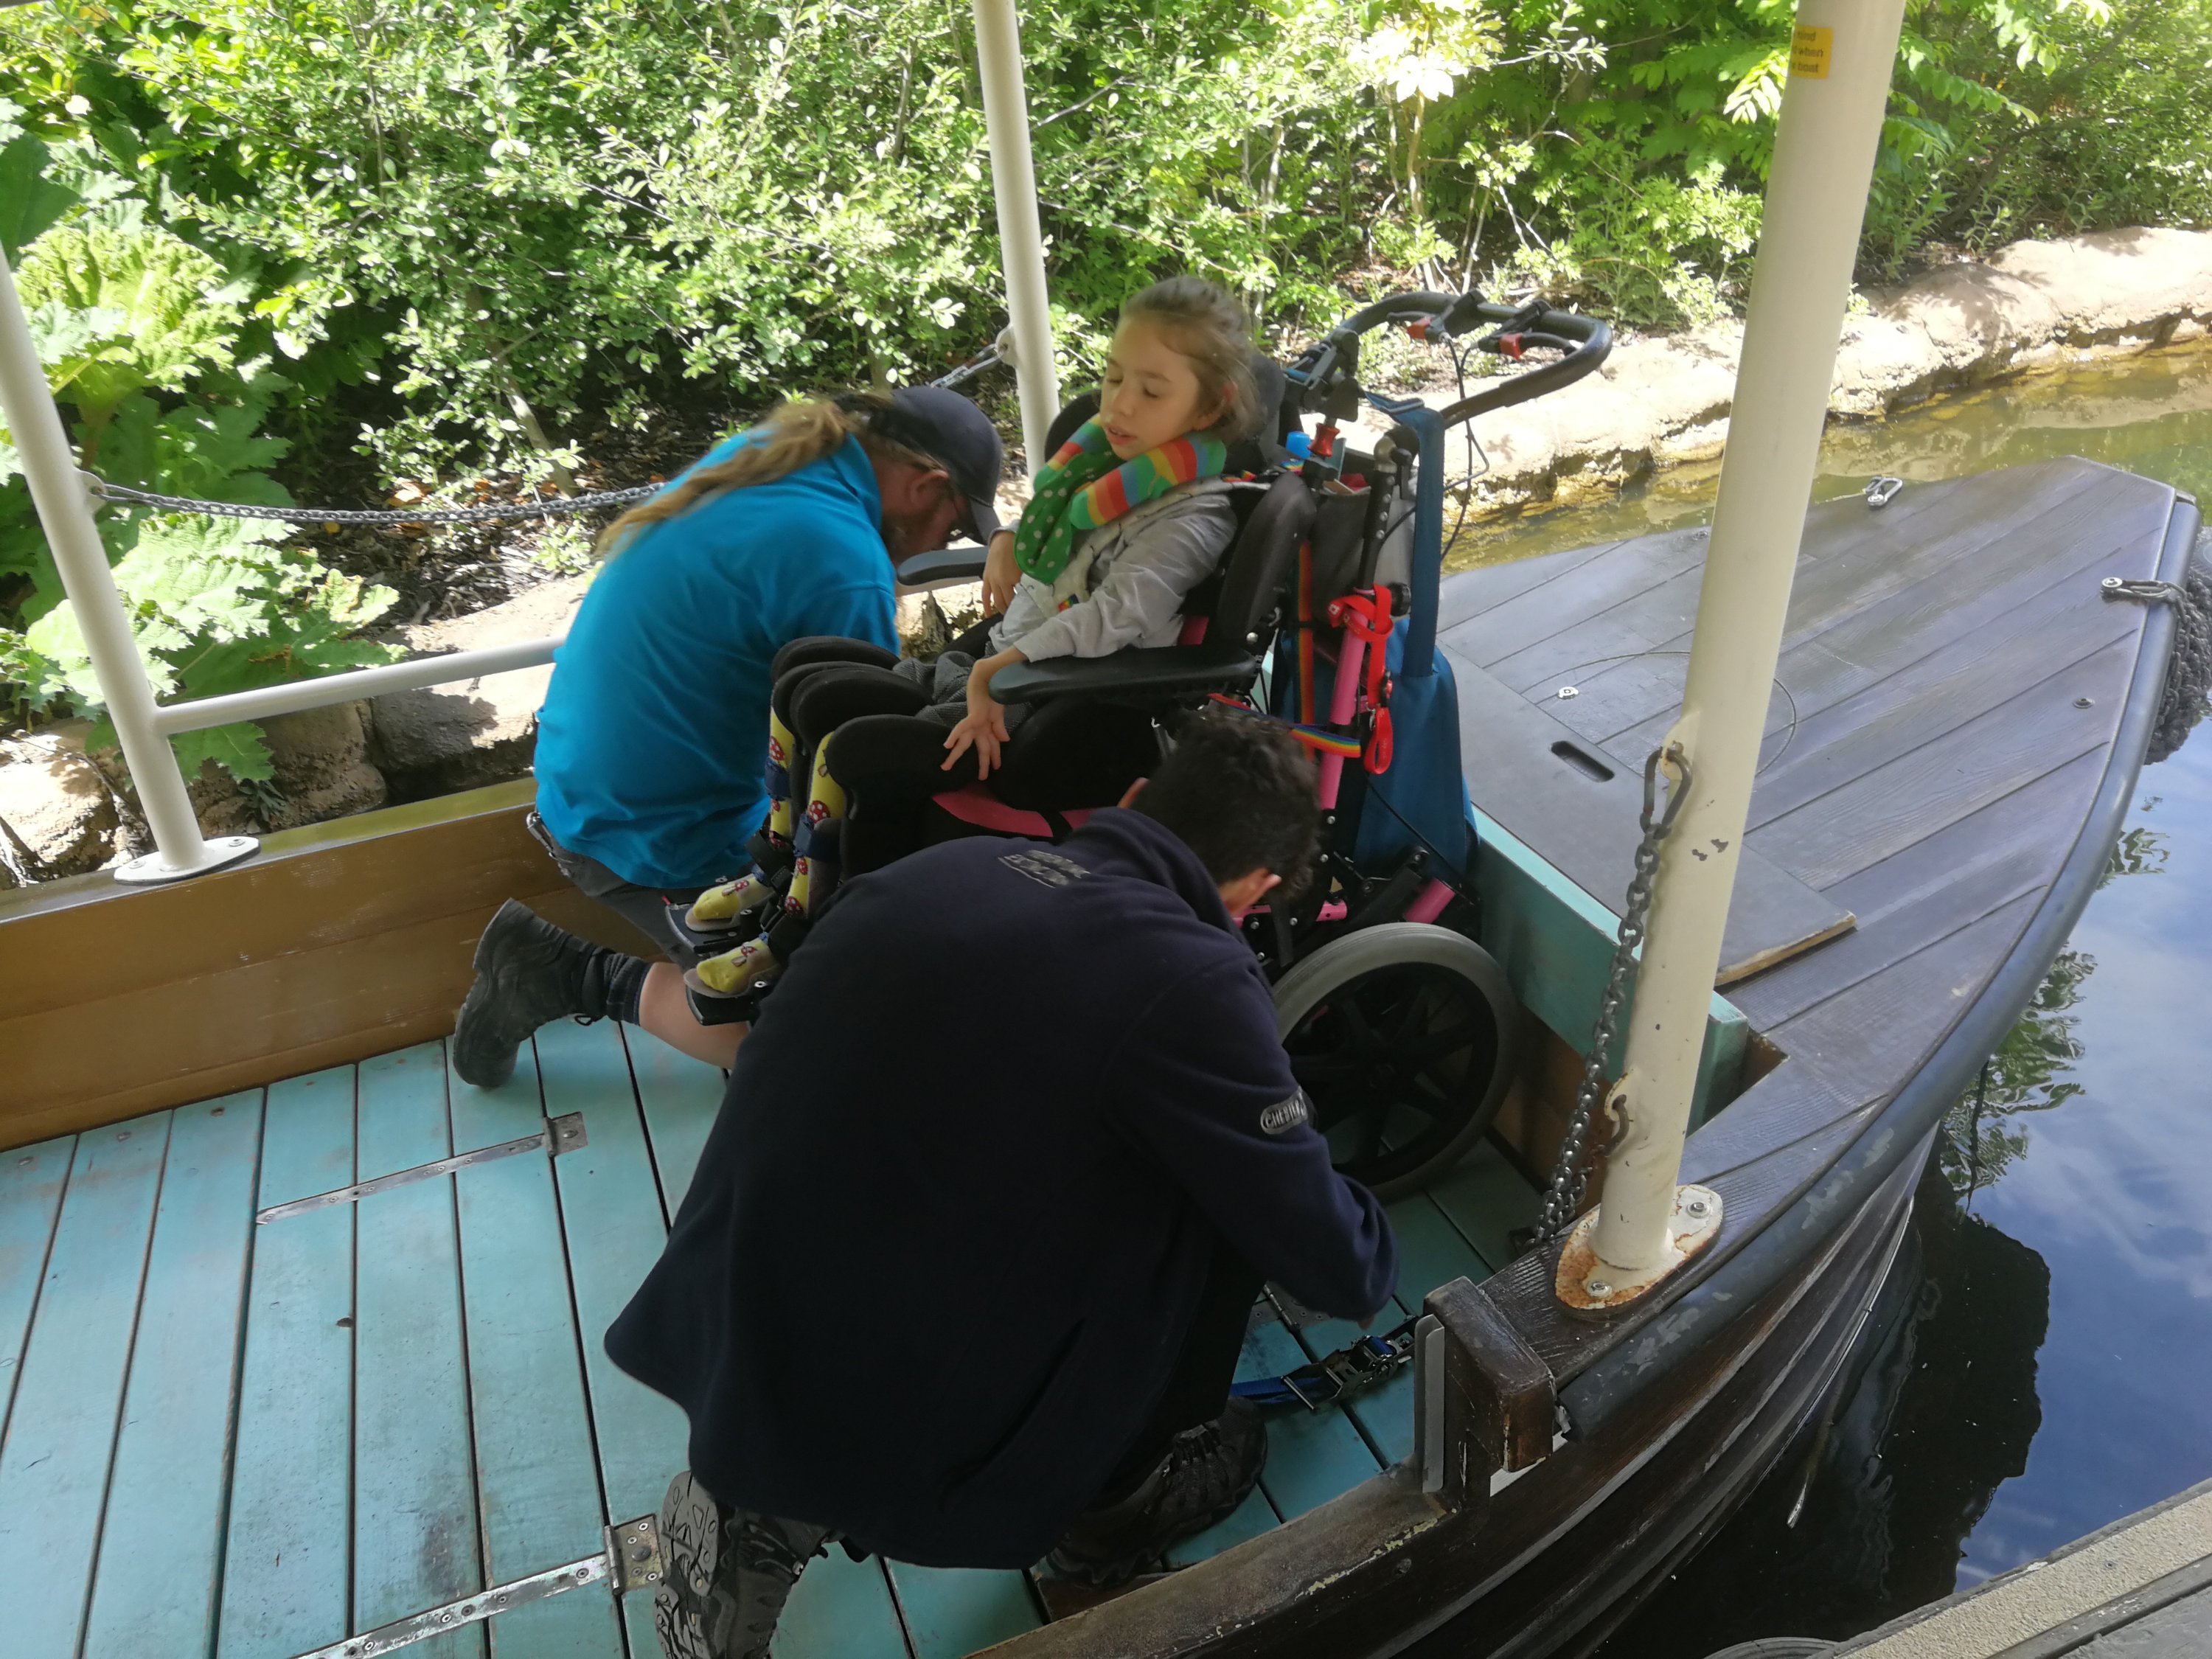 Wheelchair being secured into the boat by Chester Zoo staff